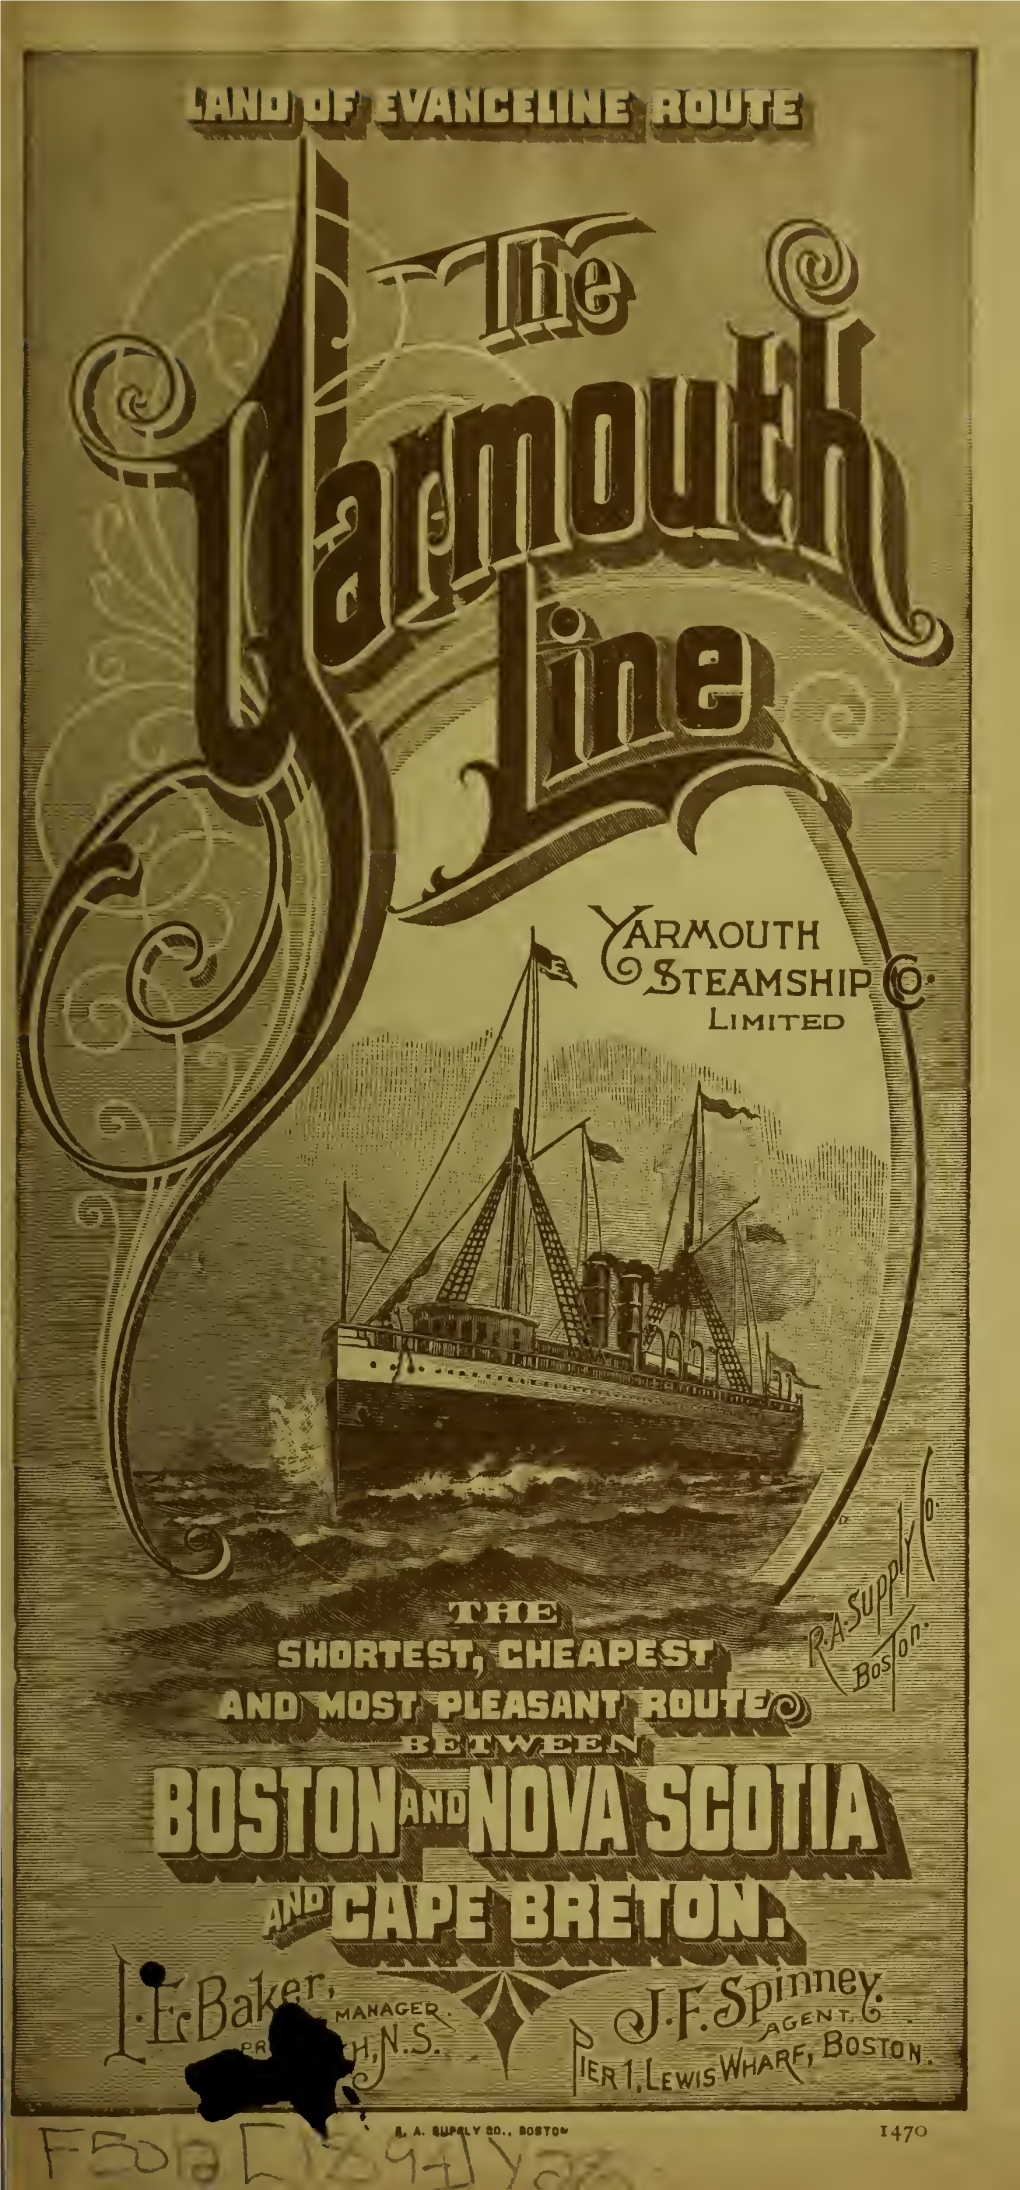 Land of Evangeline Route the Yarmouth Line